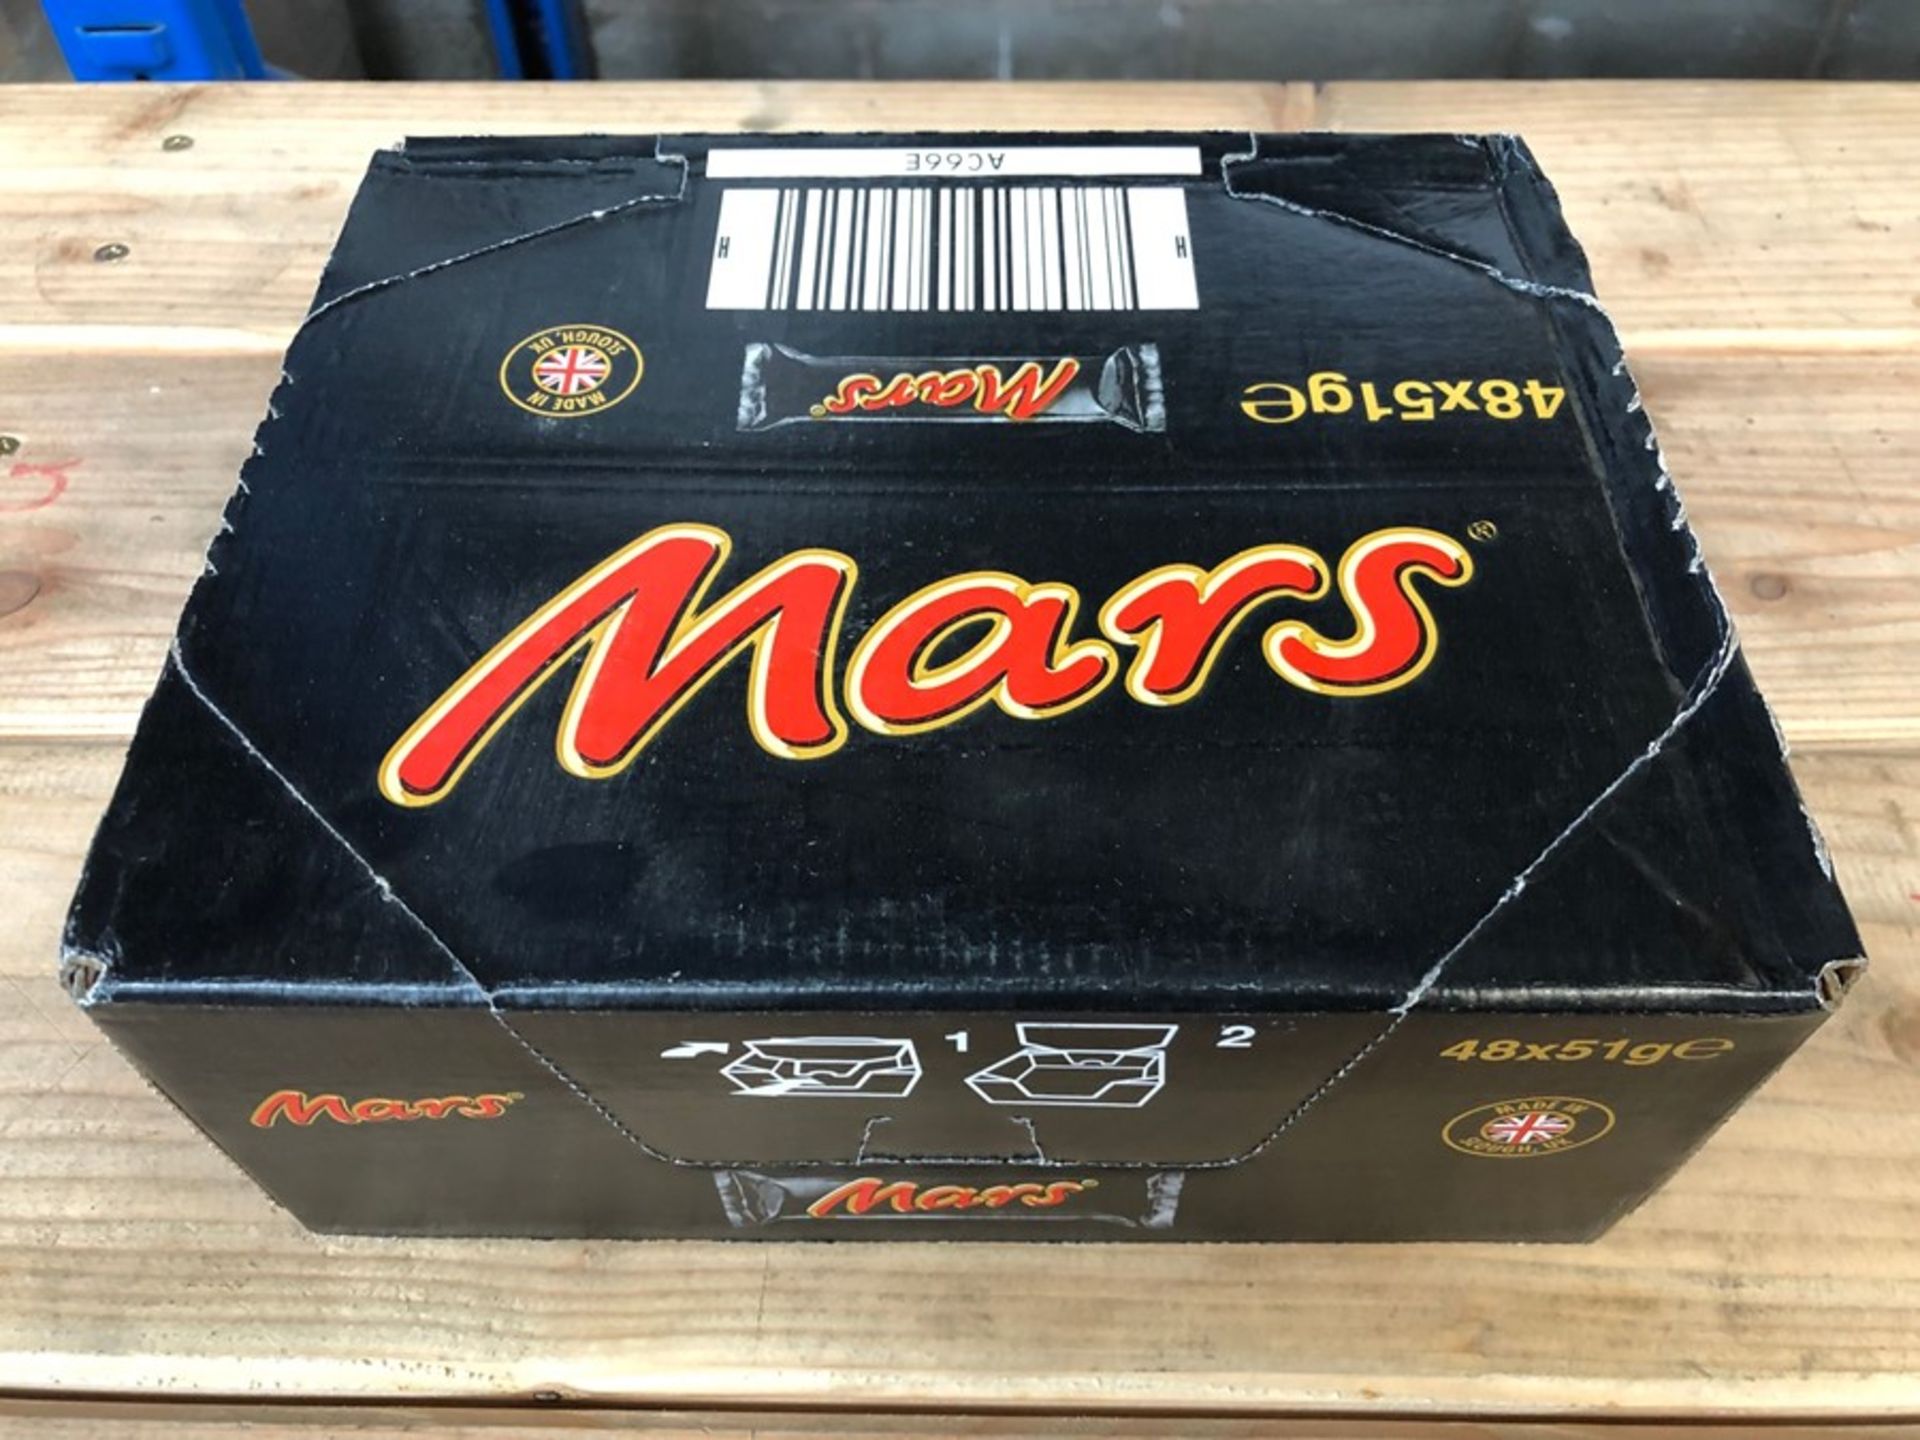 1 LOT TO CONTAIN 2 BOXES OF MARS BARS - 48 MARS PER BOX / BEST BEFORE 07-06-20